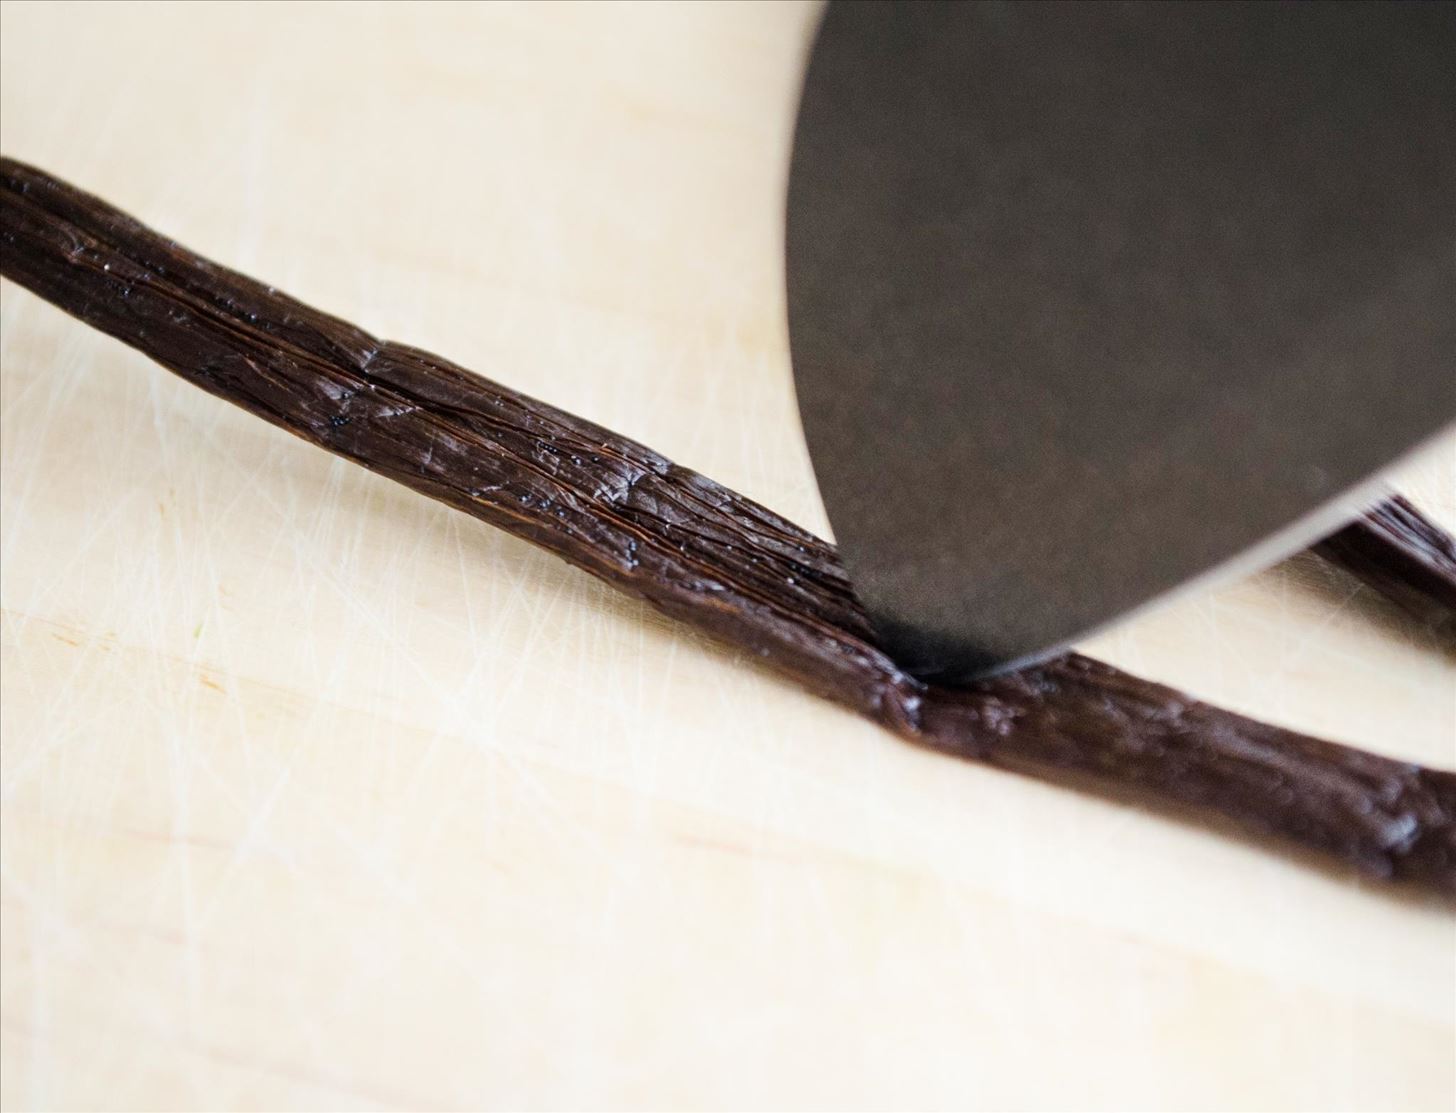 Ditch the Extract & Get Serious About Baking with Vanilla Beans